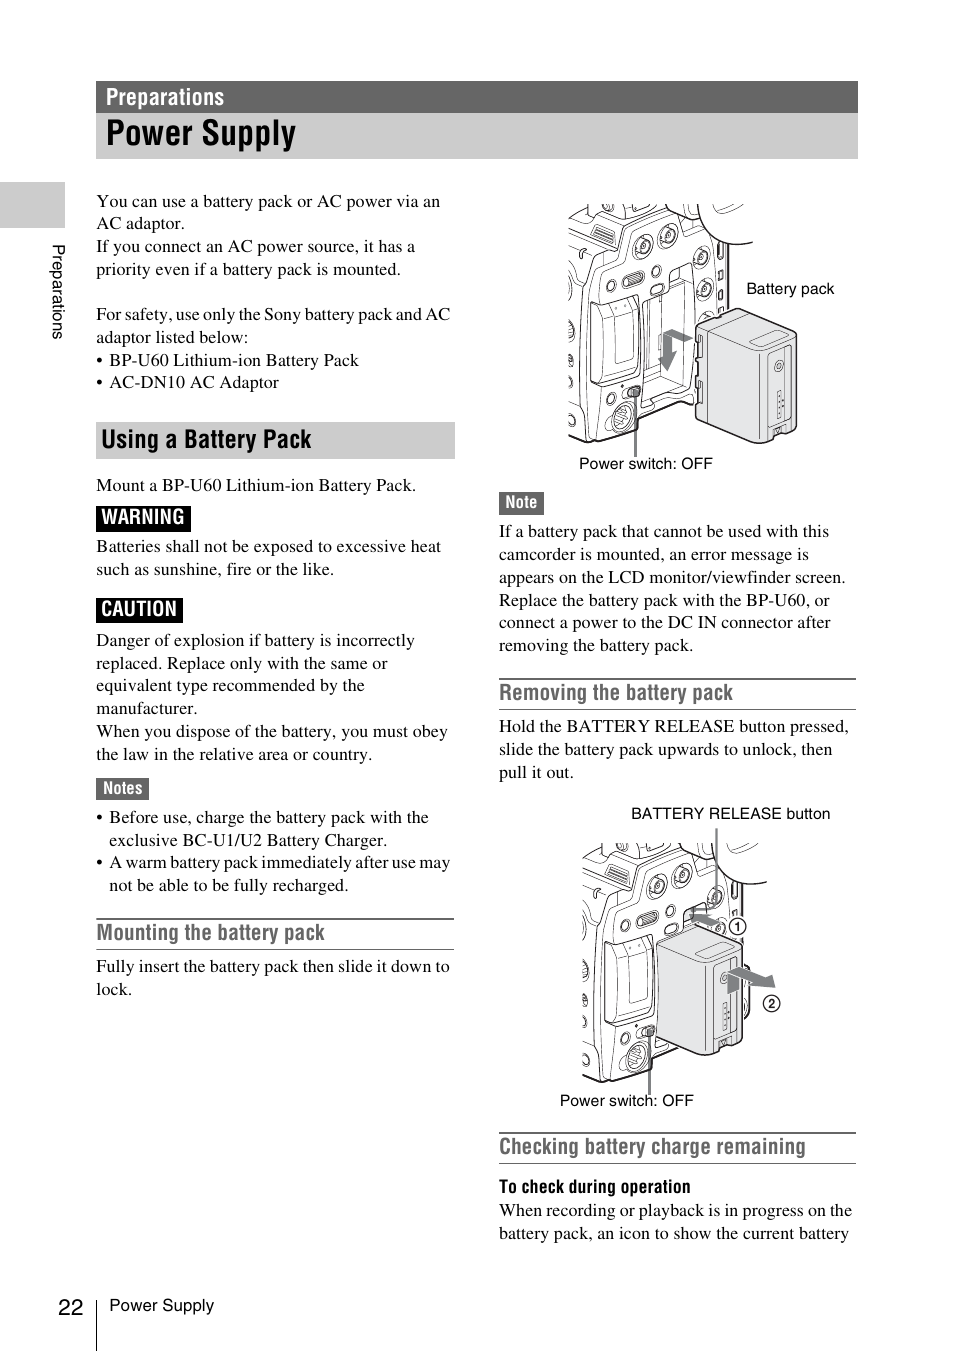 Preparations, Power supply, Using a battery pack | Sony PMW-F3K User Manual | Page 22 / 164